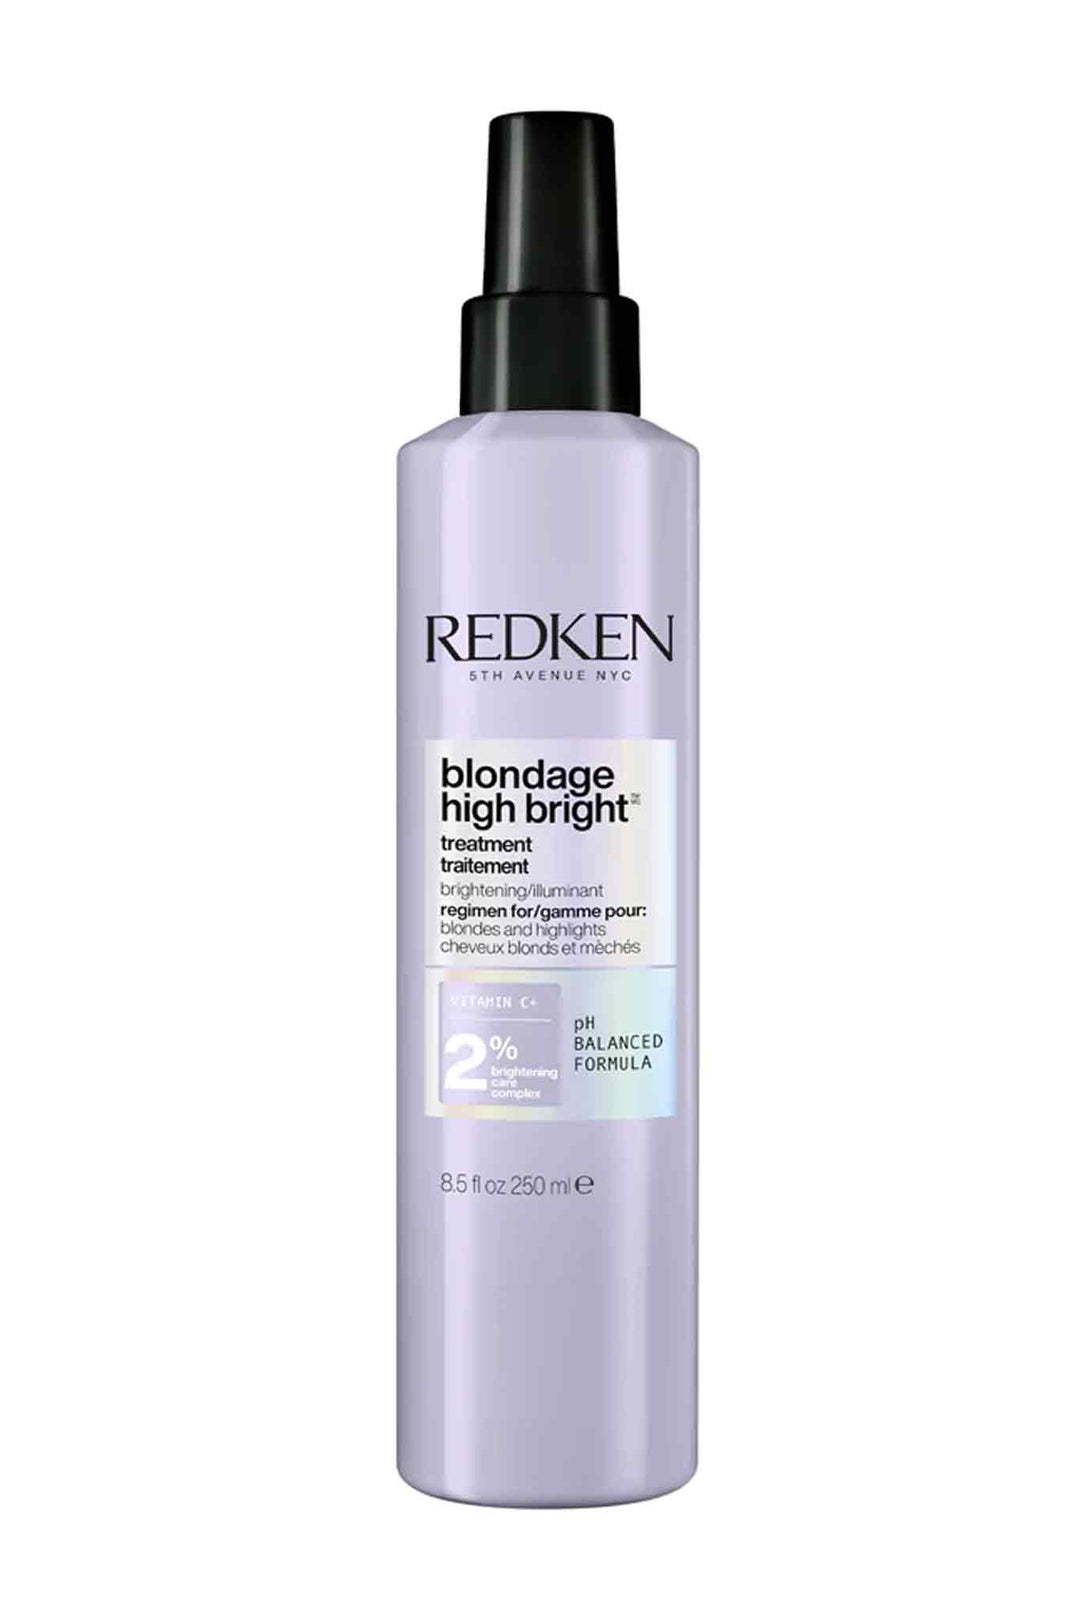 Blonde hair that loses its brightness between visits to the salon? Redken's got you covered. The secret step one in your brightening system, this treatment will prep your hair with chelating agents to clarify before you shampoo.